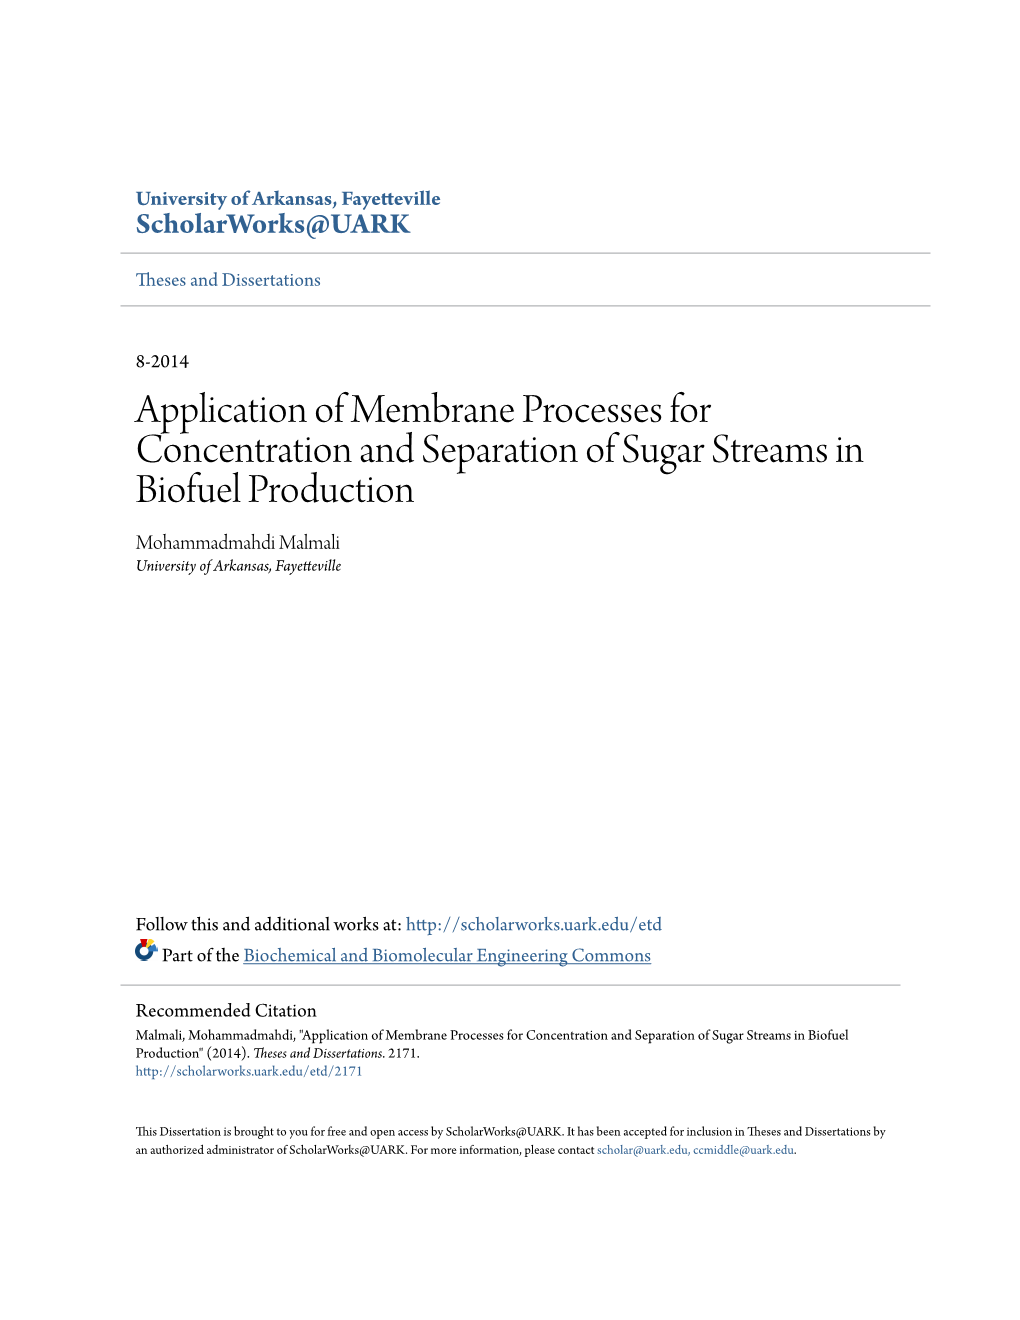 Application of Membrane Processes for Concentration and Separation of Sugar Streams in Biofuel Production Mohammadmahdi Malmali University of Arkansas, Fayetteville